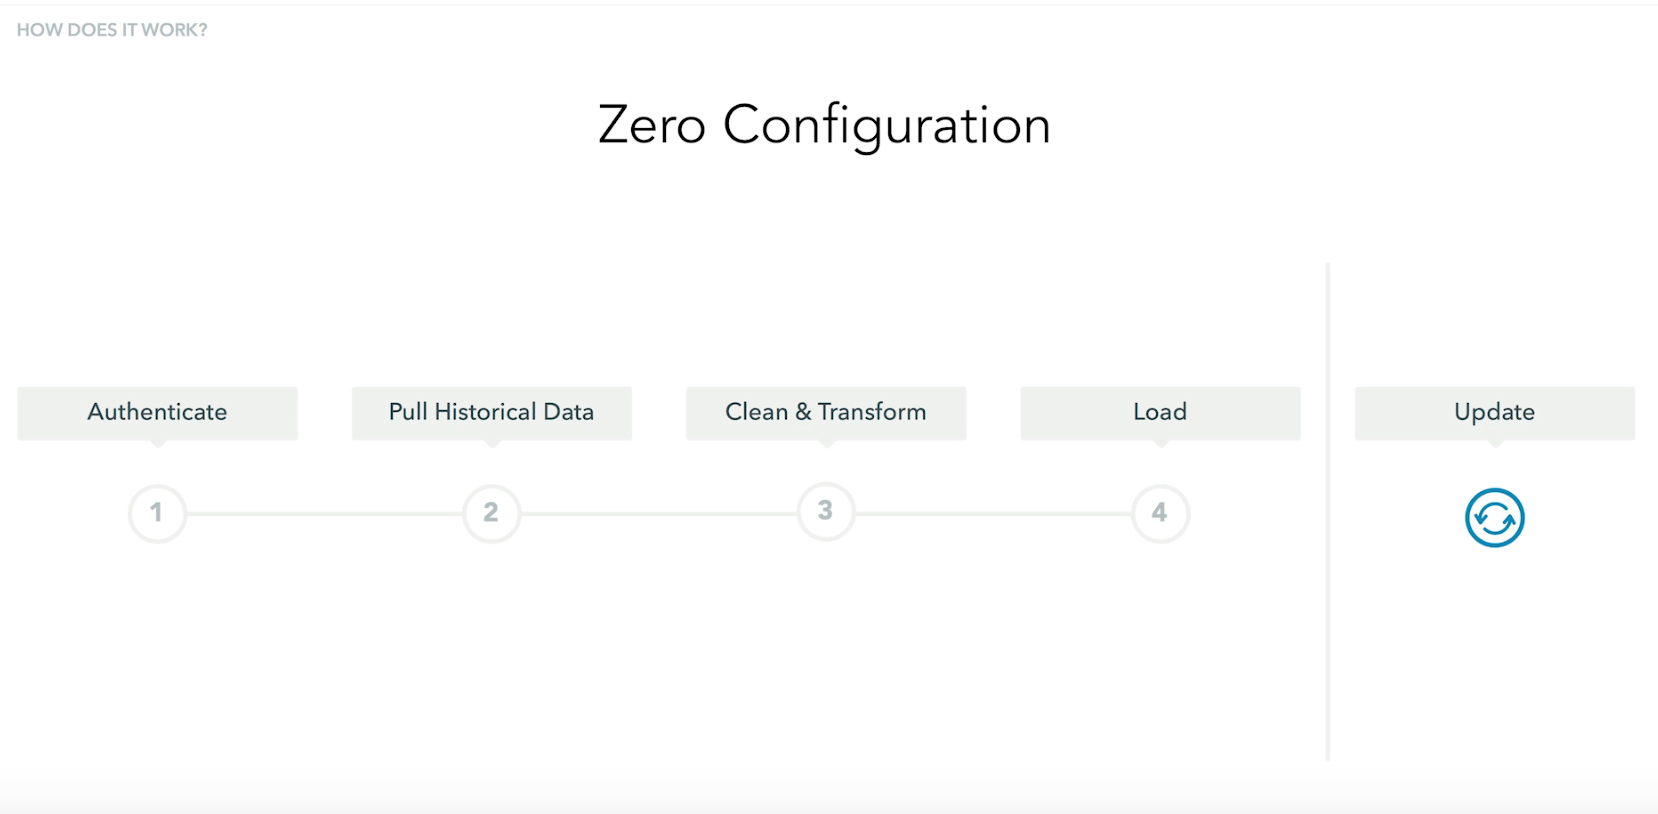 Fivetran Software - Fivetran is a zero configuration data pipeline, enabling users to get up and running in 5 minutes